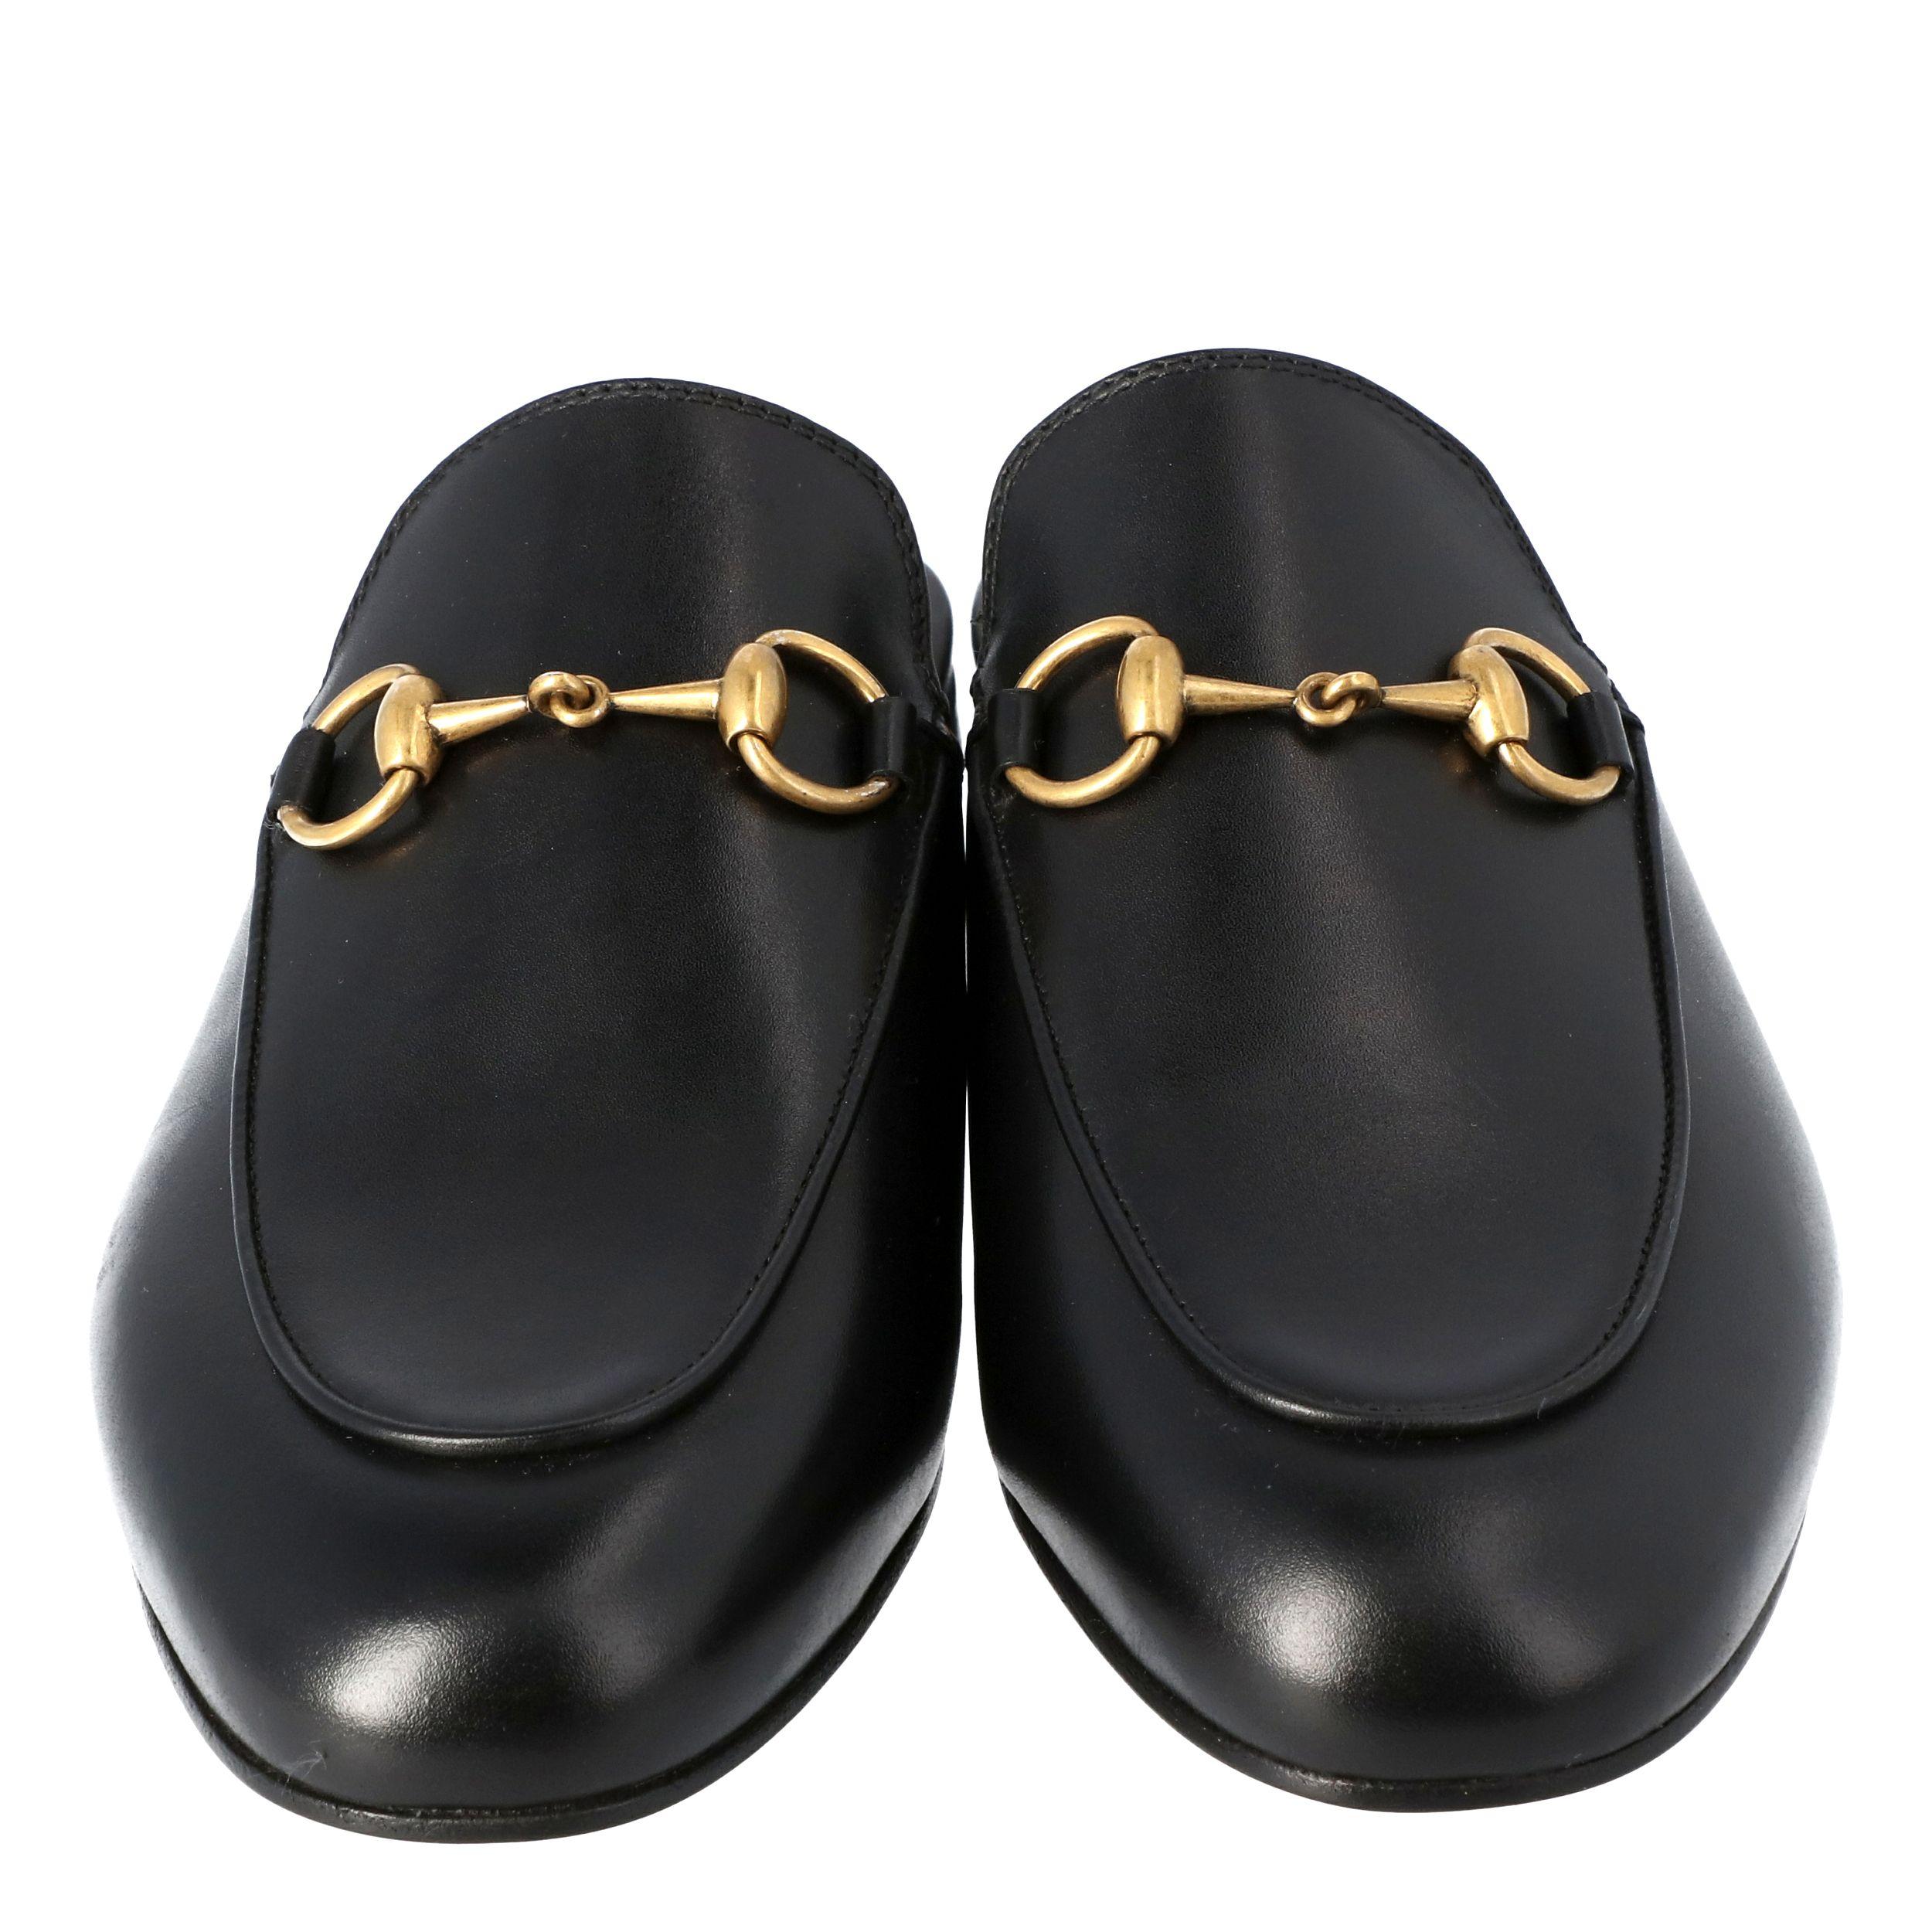 Characterized by a buckle embellished detail this pair of mules from the house of Gucci is designed to bring about a trendy twist to your casual attire. Flawlessly cut from leather, these black colored mules feature a slip-on structure and can be